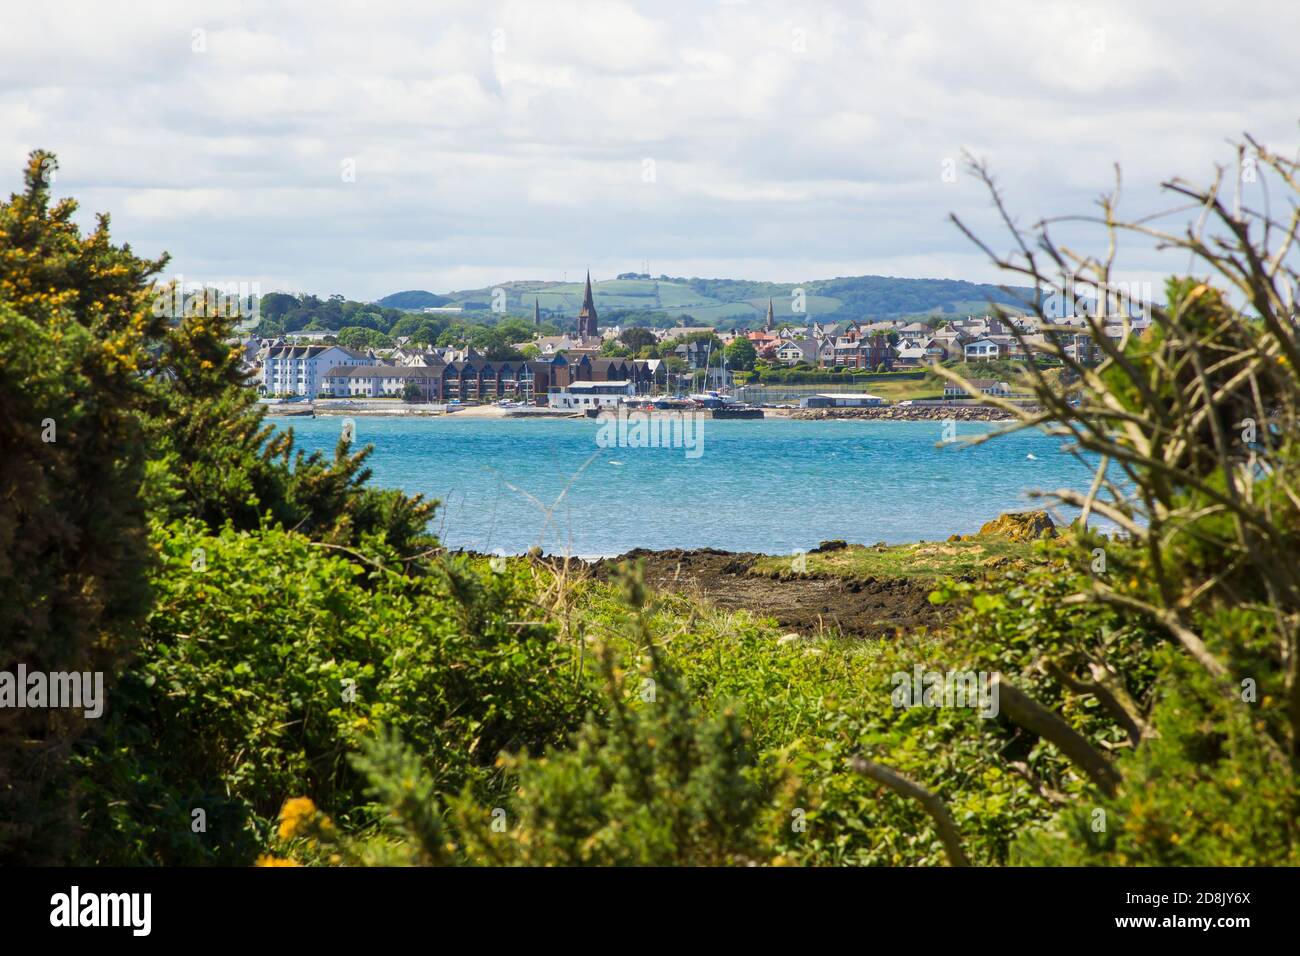 3 June 2020 A view across Ballyholme Bay through the whin bushes at Ballymacormick Point in Bangor County Down Northern Ireland. The Craigantlet hills Stock Photo